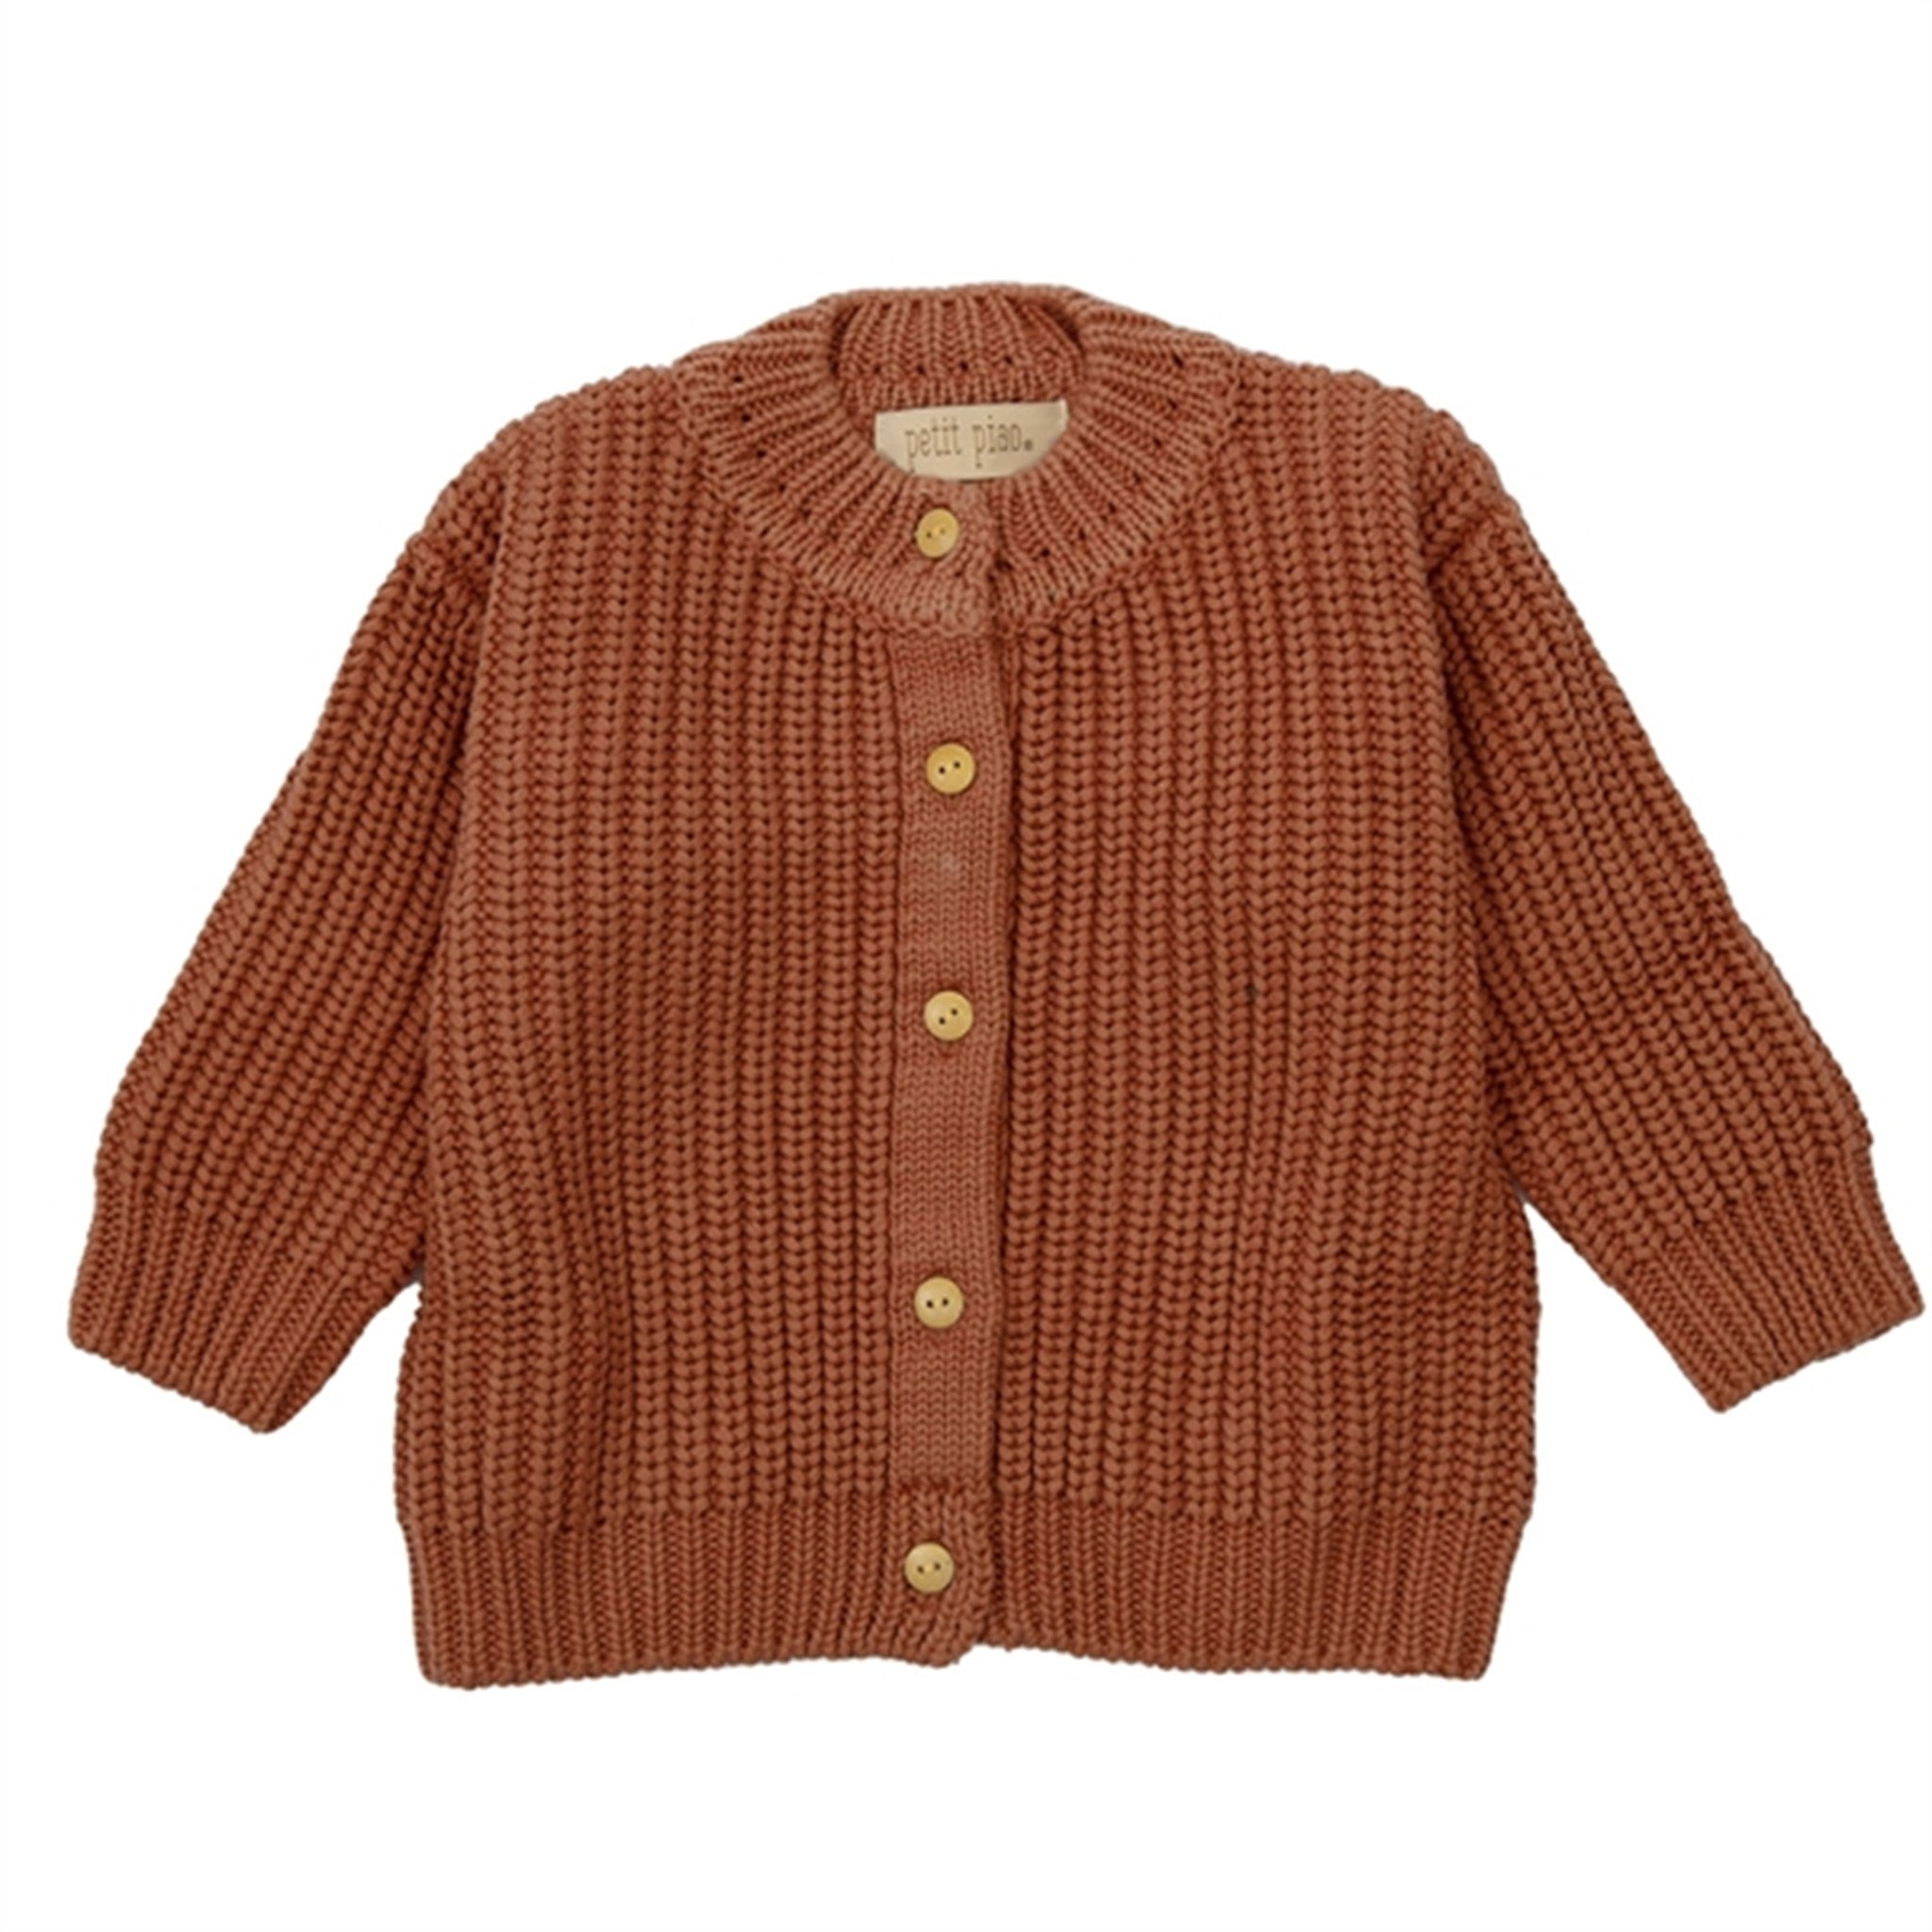 Petit Piao Copper Brown Chunky Knit Cardigan